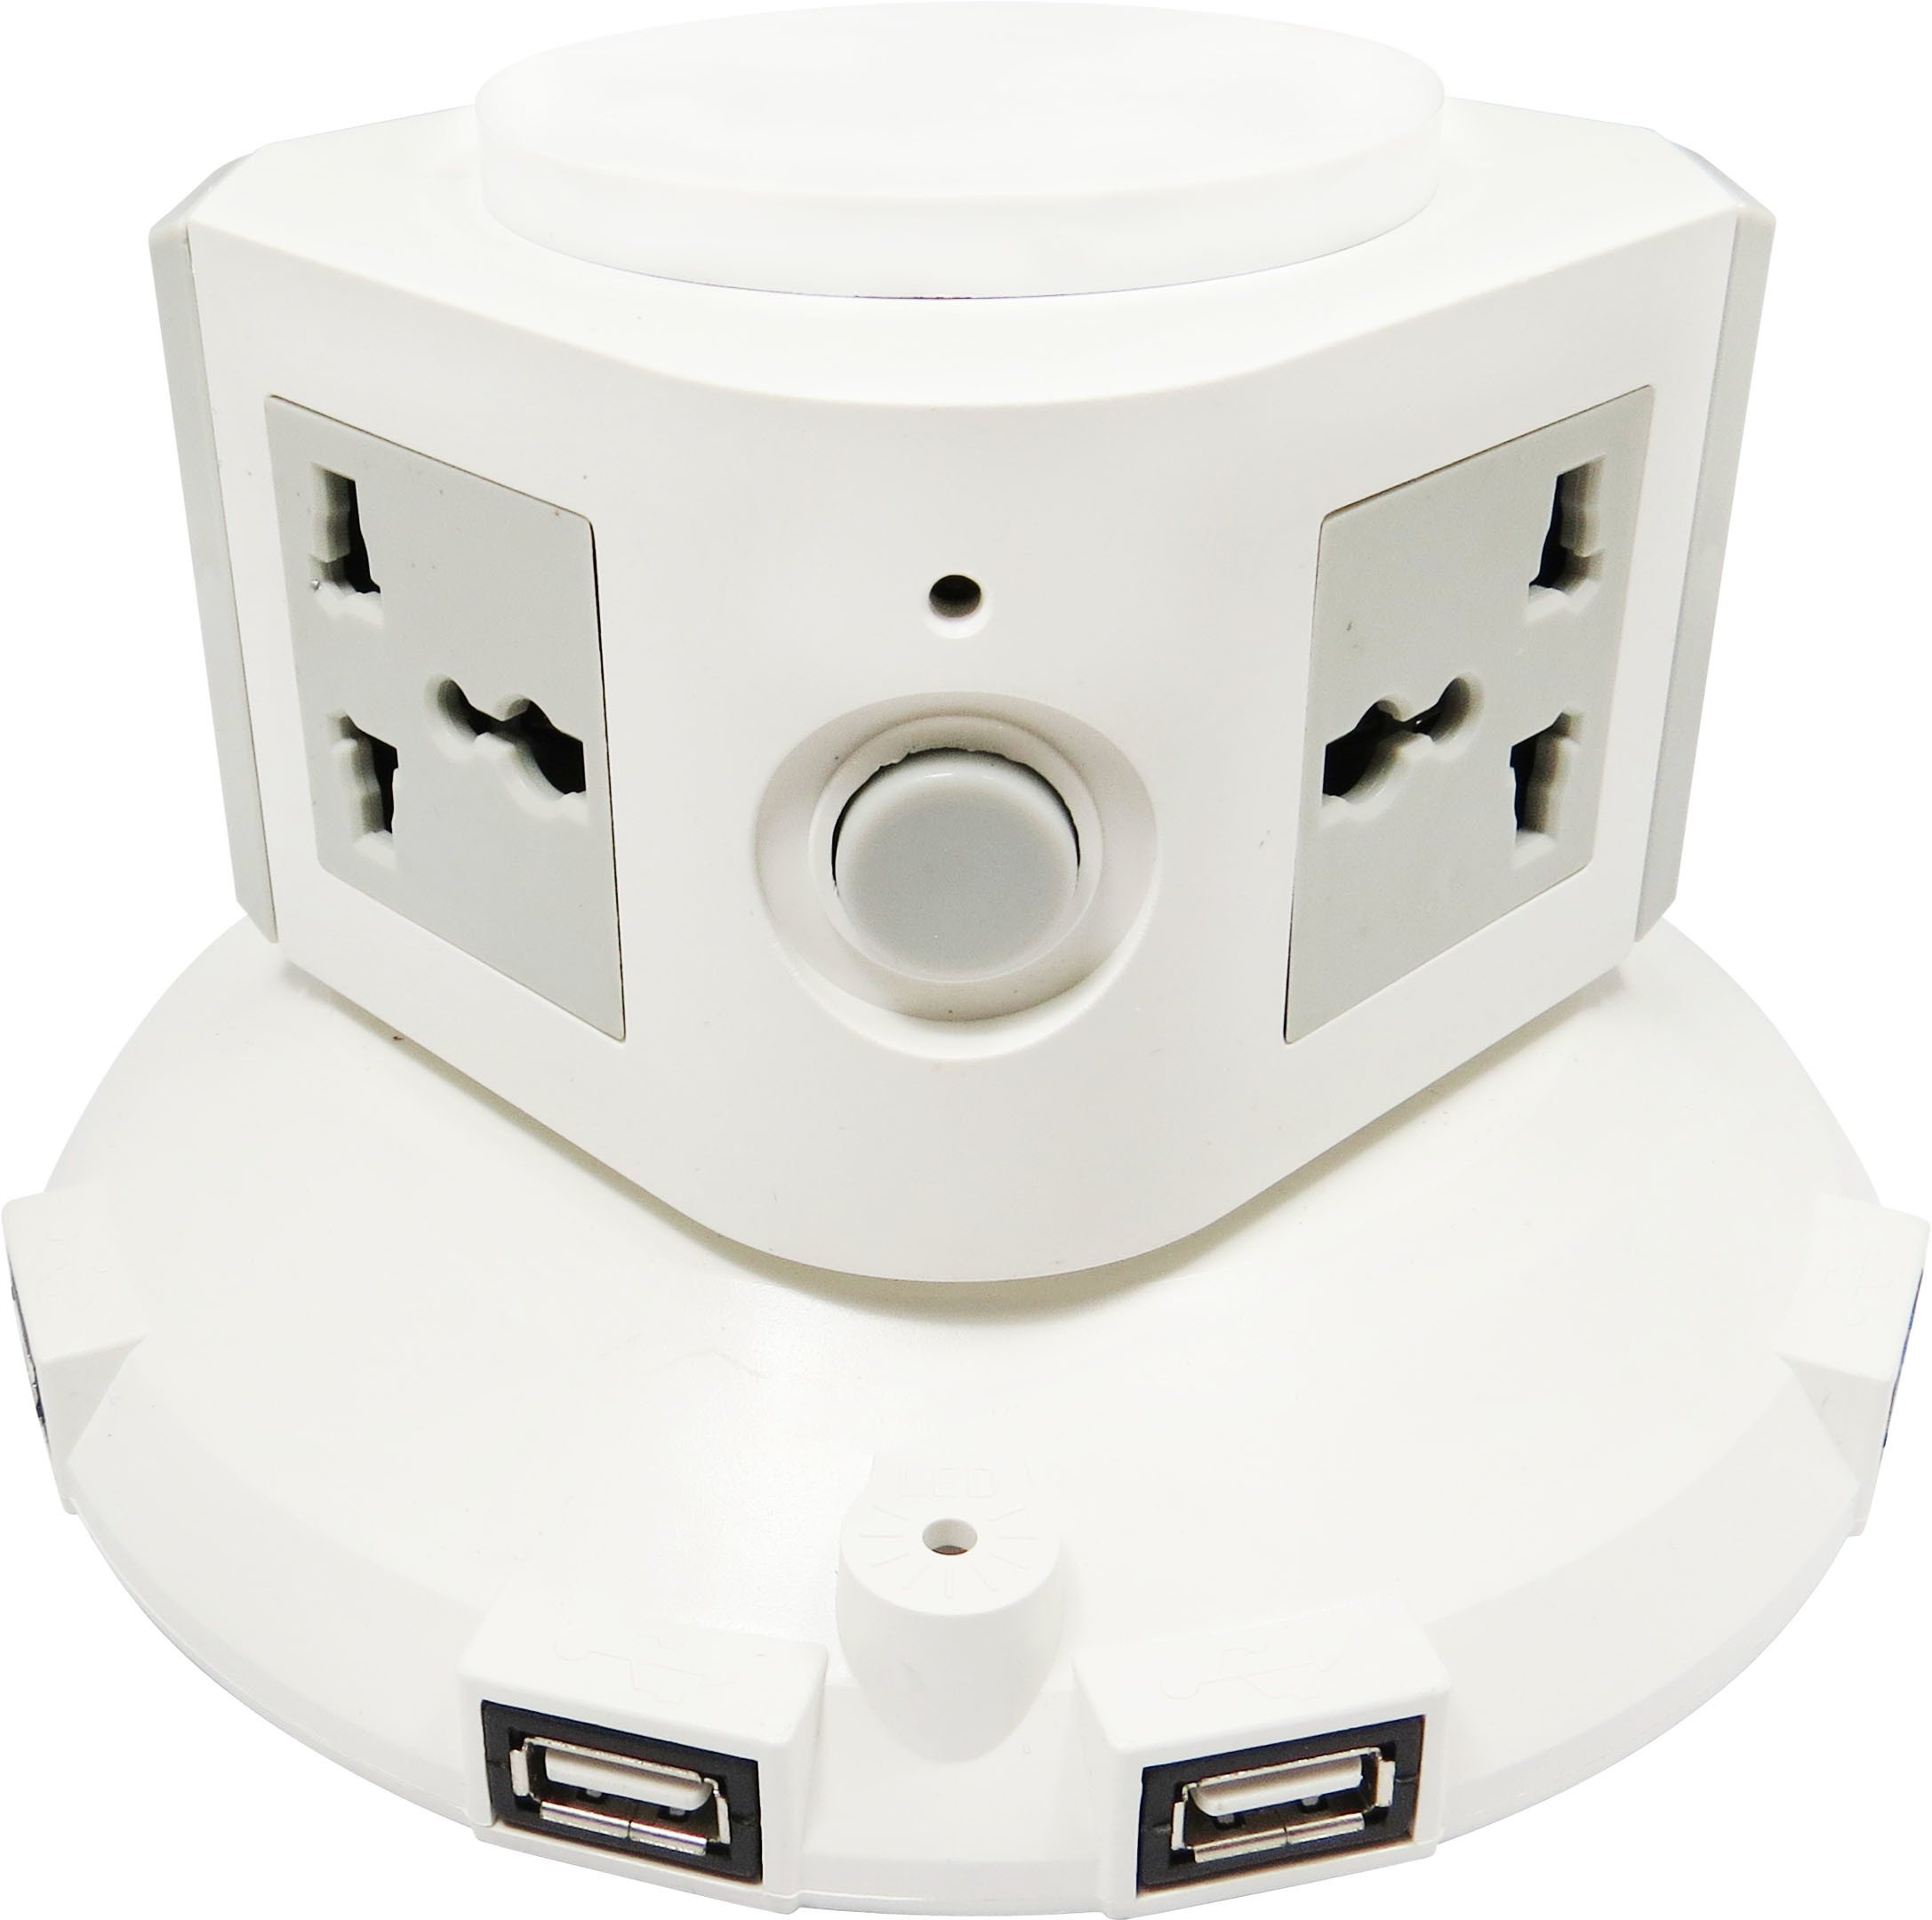 New Design One Layer Vertical Socket with 5 USB Charger